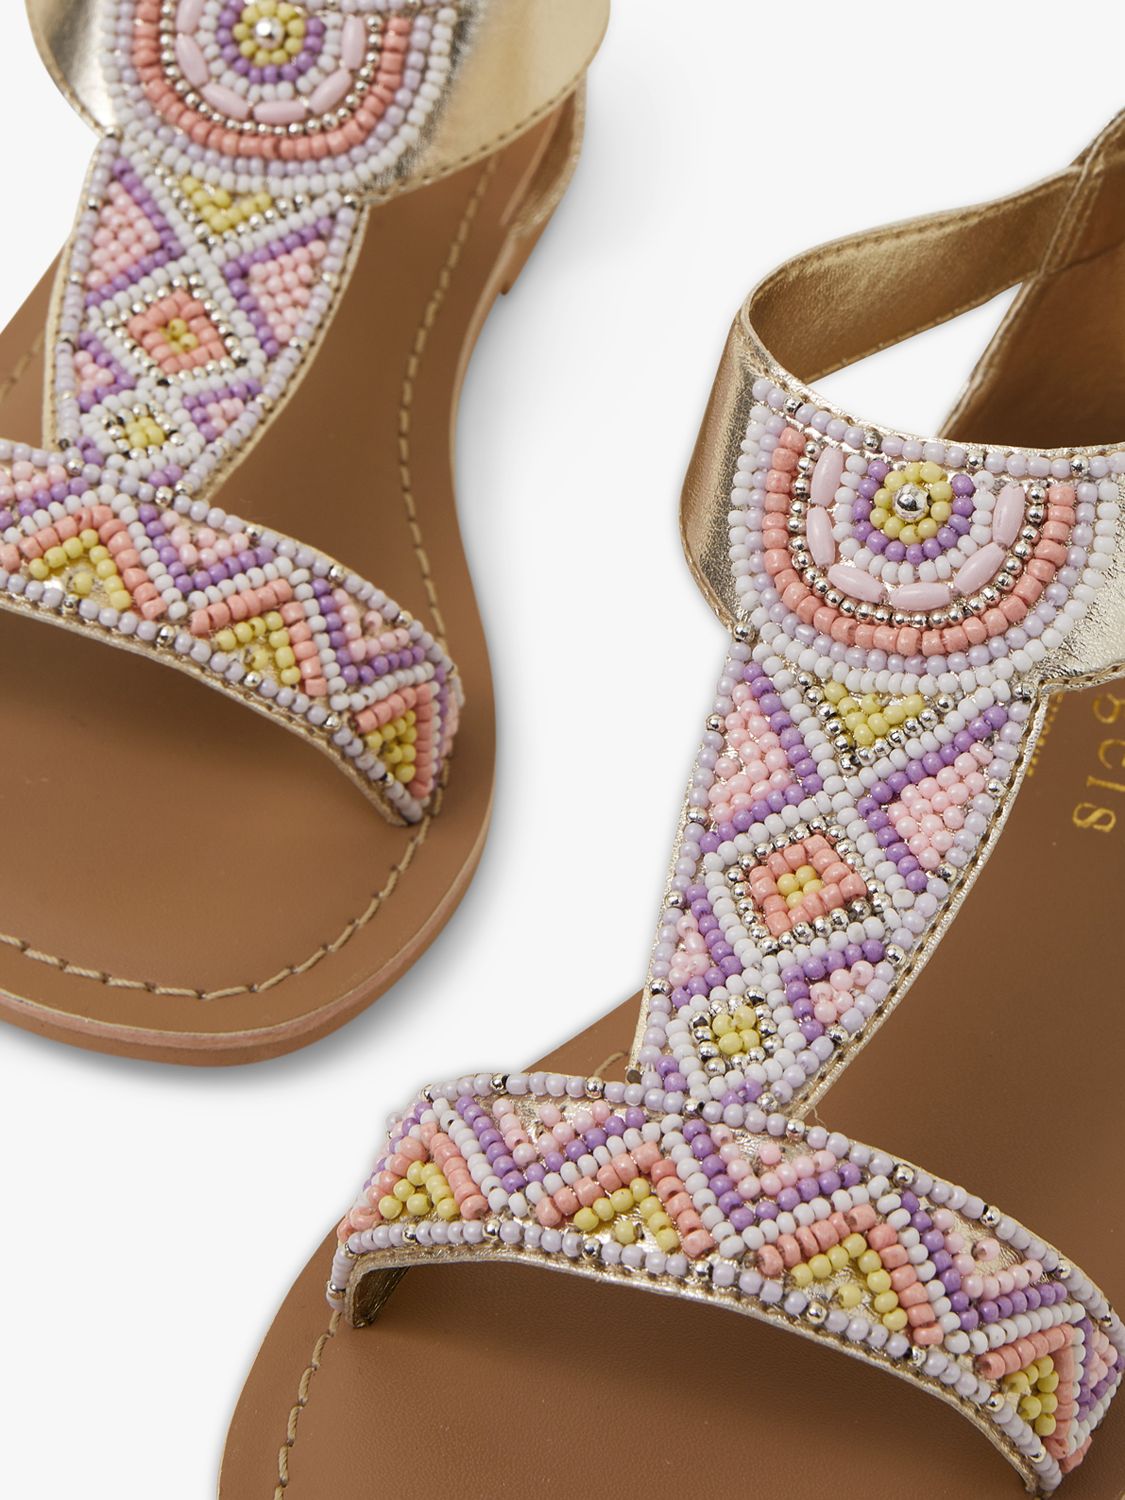 Angels by Accessorize Kids' Diamond Beaded Sandals, Lilac/Multi, 7 Jnr